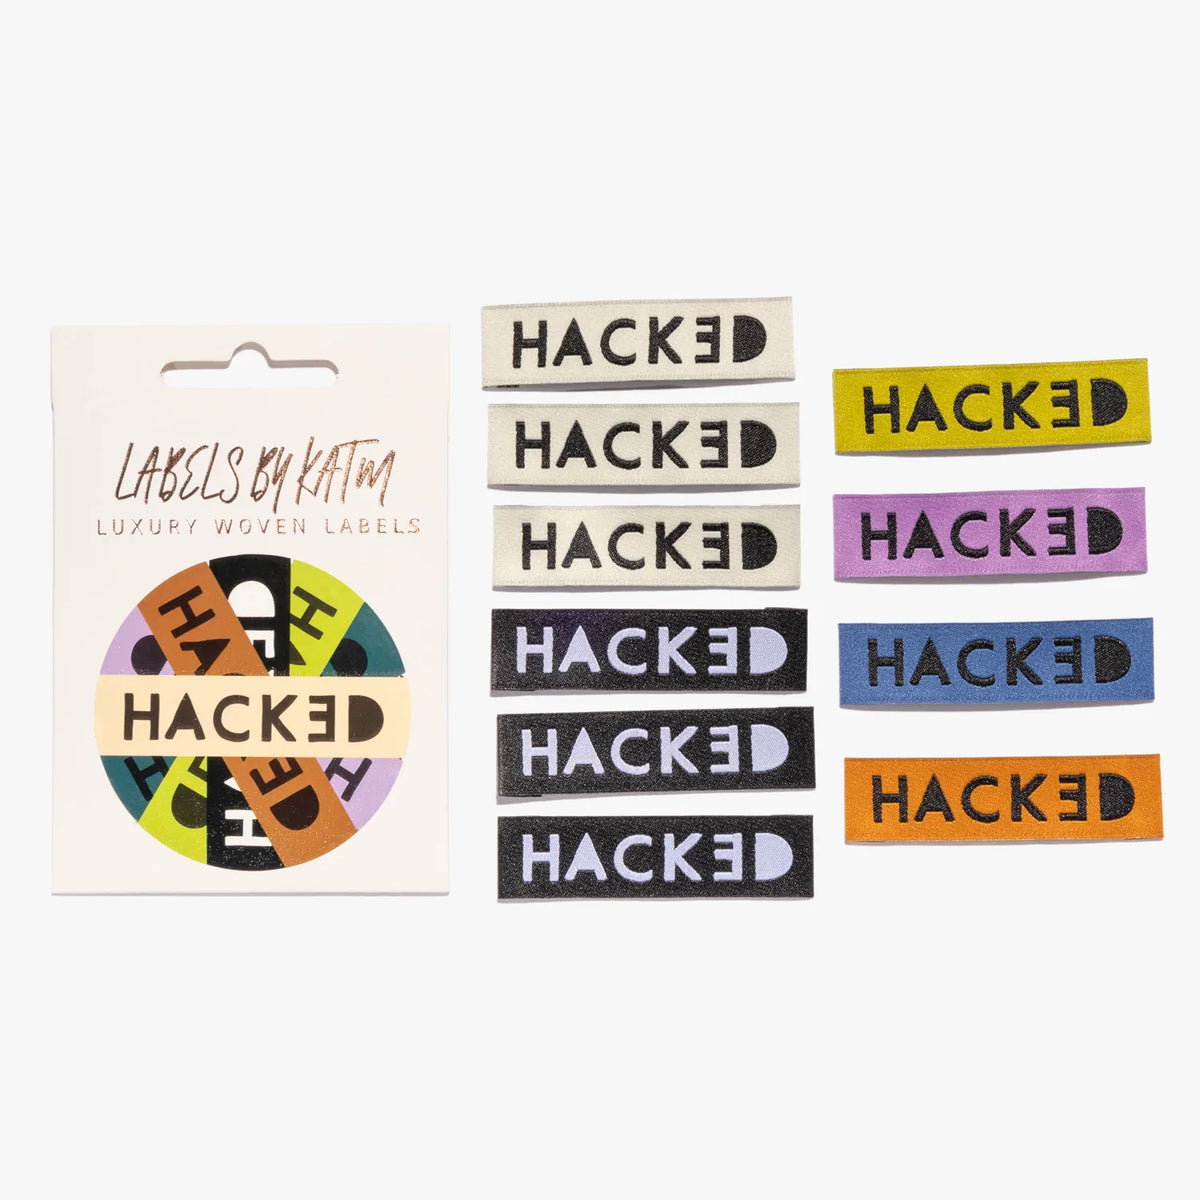 HACKED by KATM - Pack of 10 Woven Labels